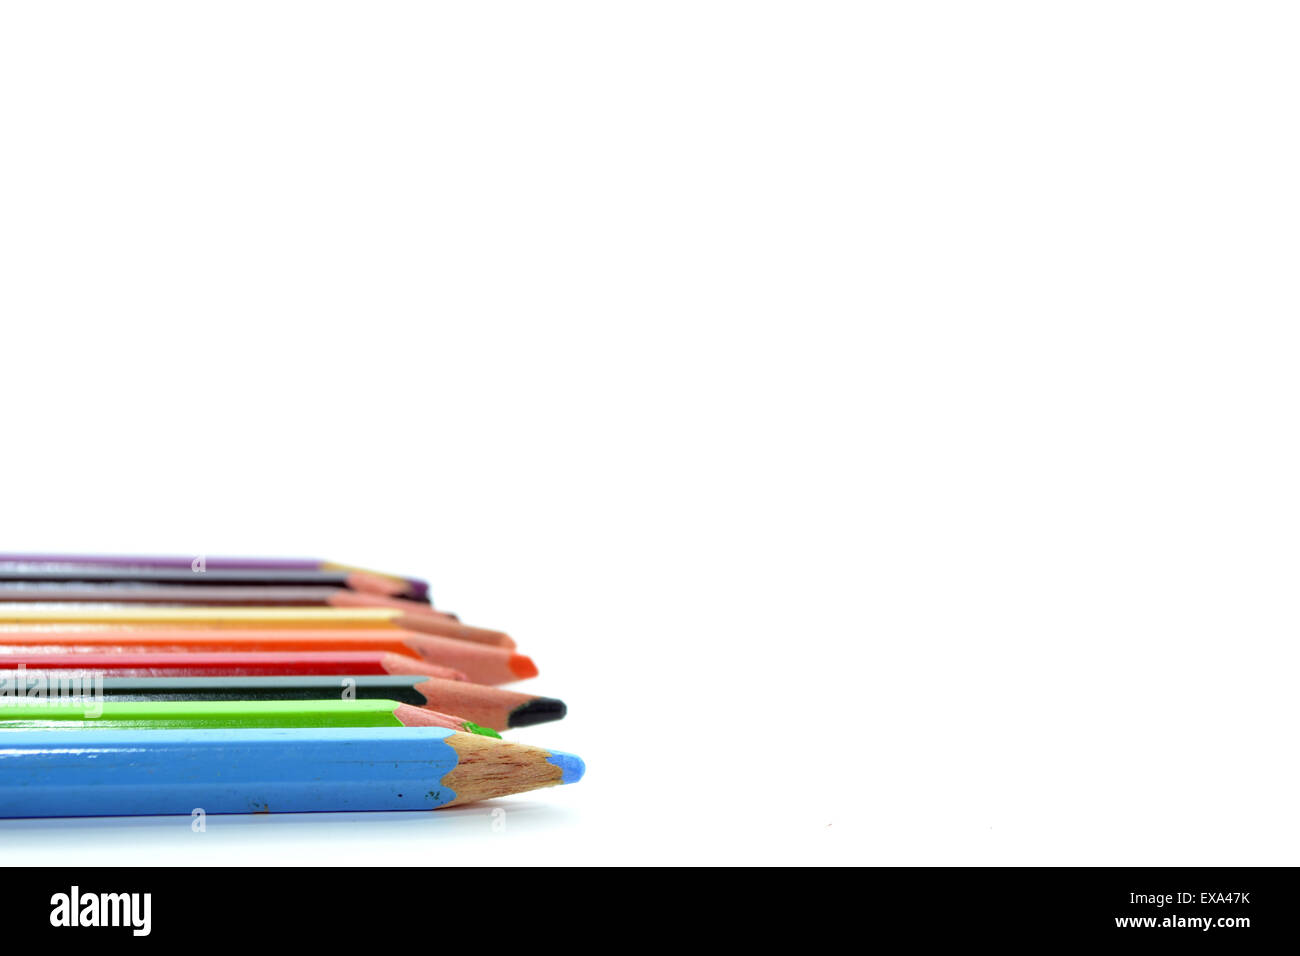 Coloring Pencil on White Background Stock Photo